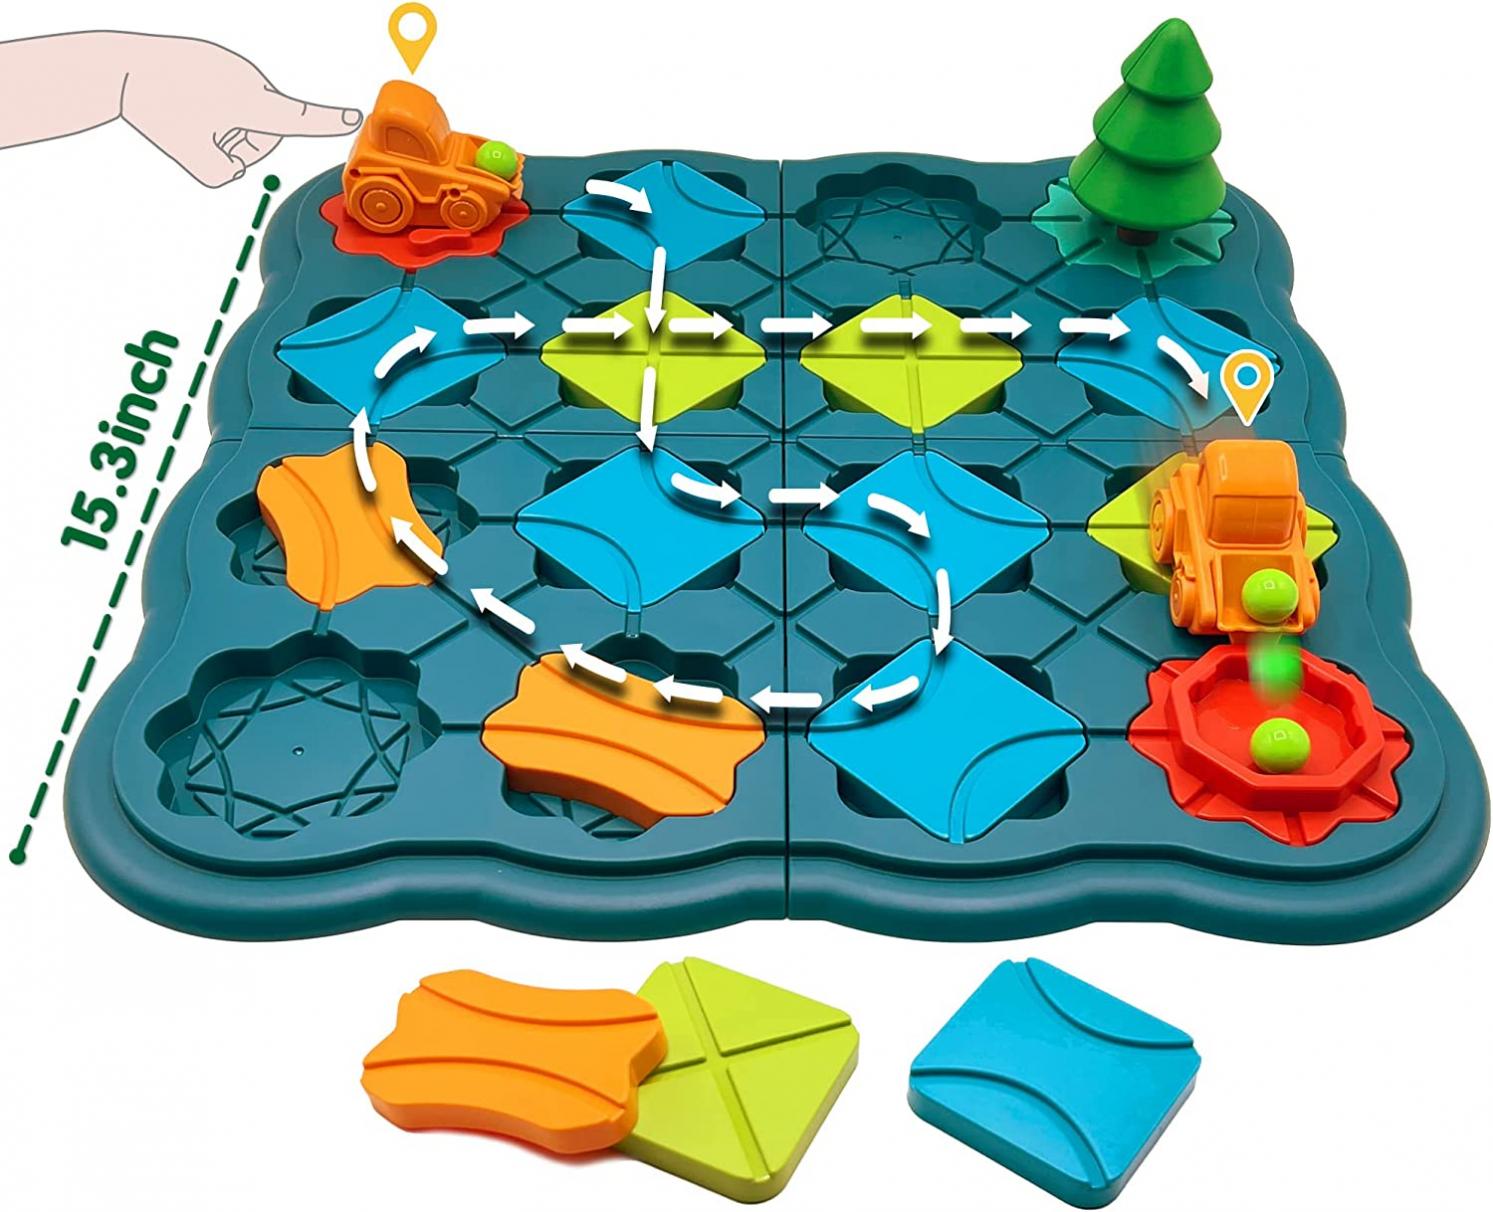 Kids Toys STEM Board Games - Smart Logical Road Builder Brain Teasers Puzzles for 3 to 4 5 6 7 Year Old Boys Girls, Educational Montessori Xmas Gifts for Ages 3-5 4-8 Preschool Classroom Learning